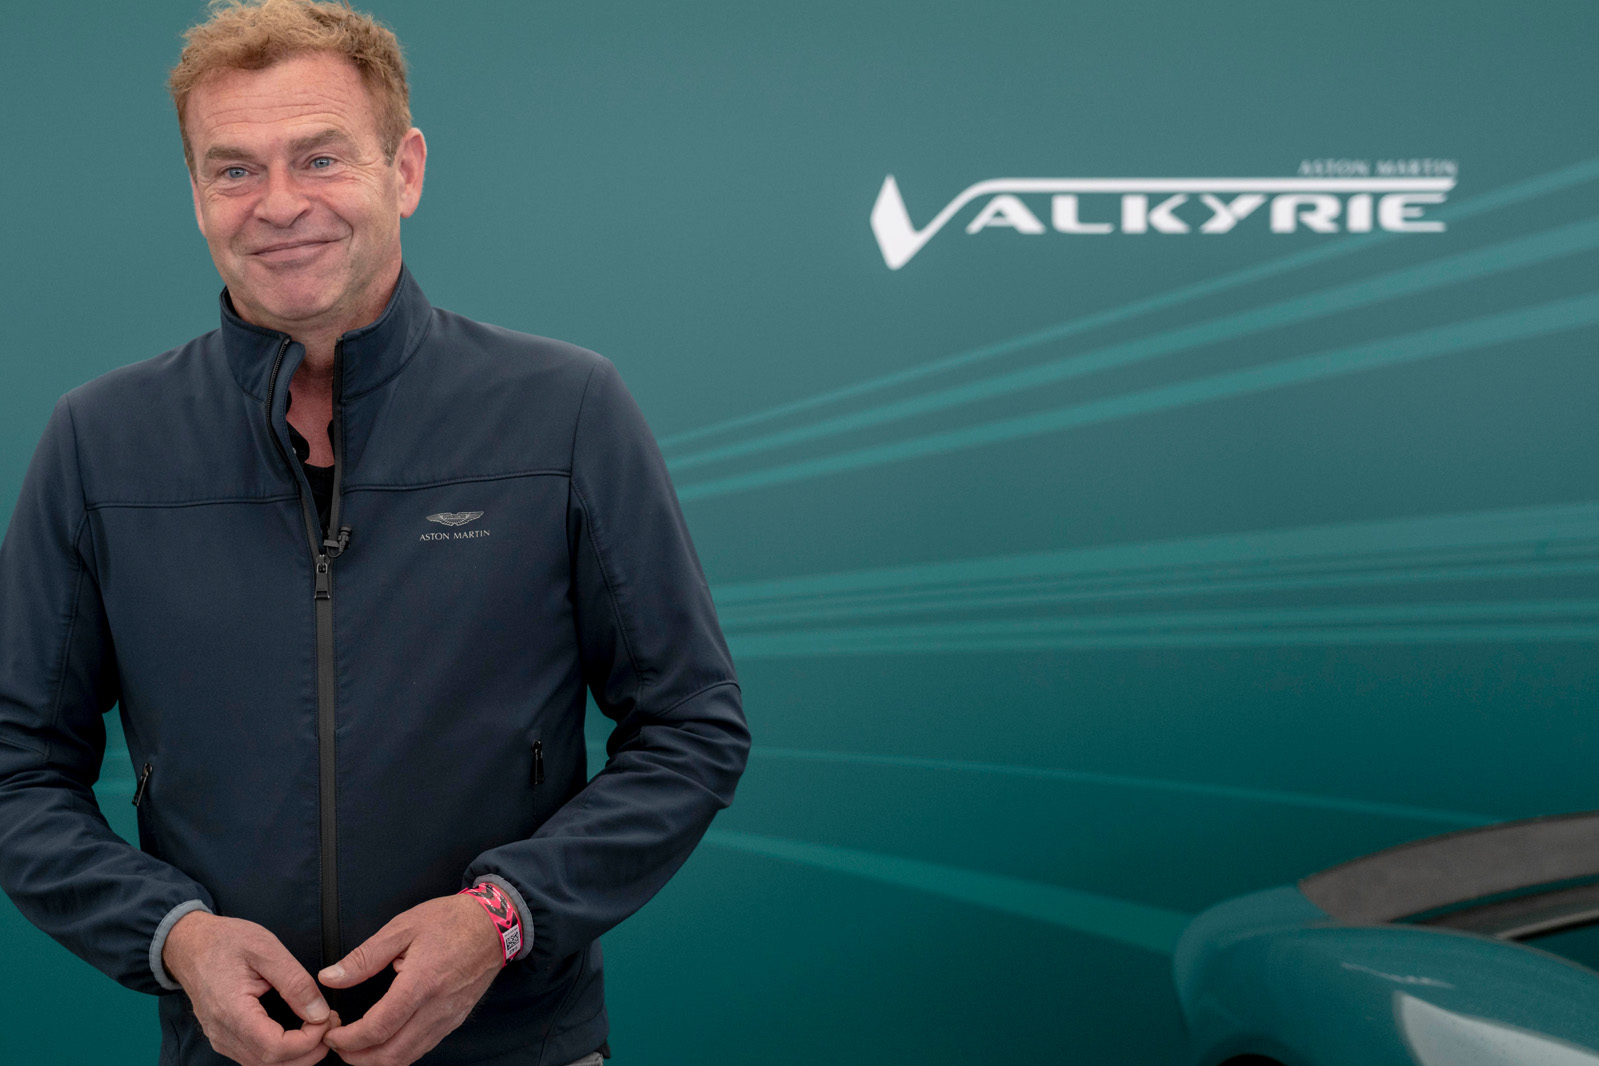 Exclusive: Aston Martin Valkyrie ride with Tobias Moers